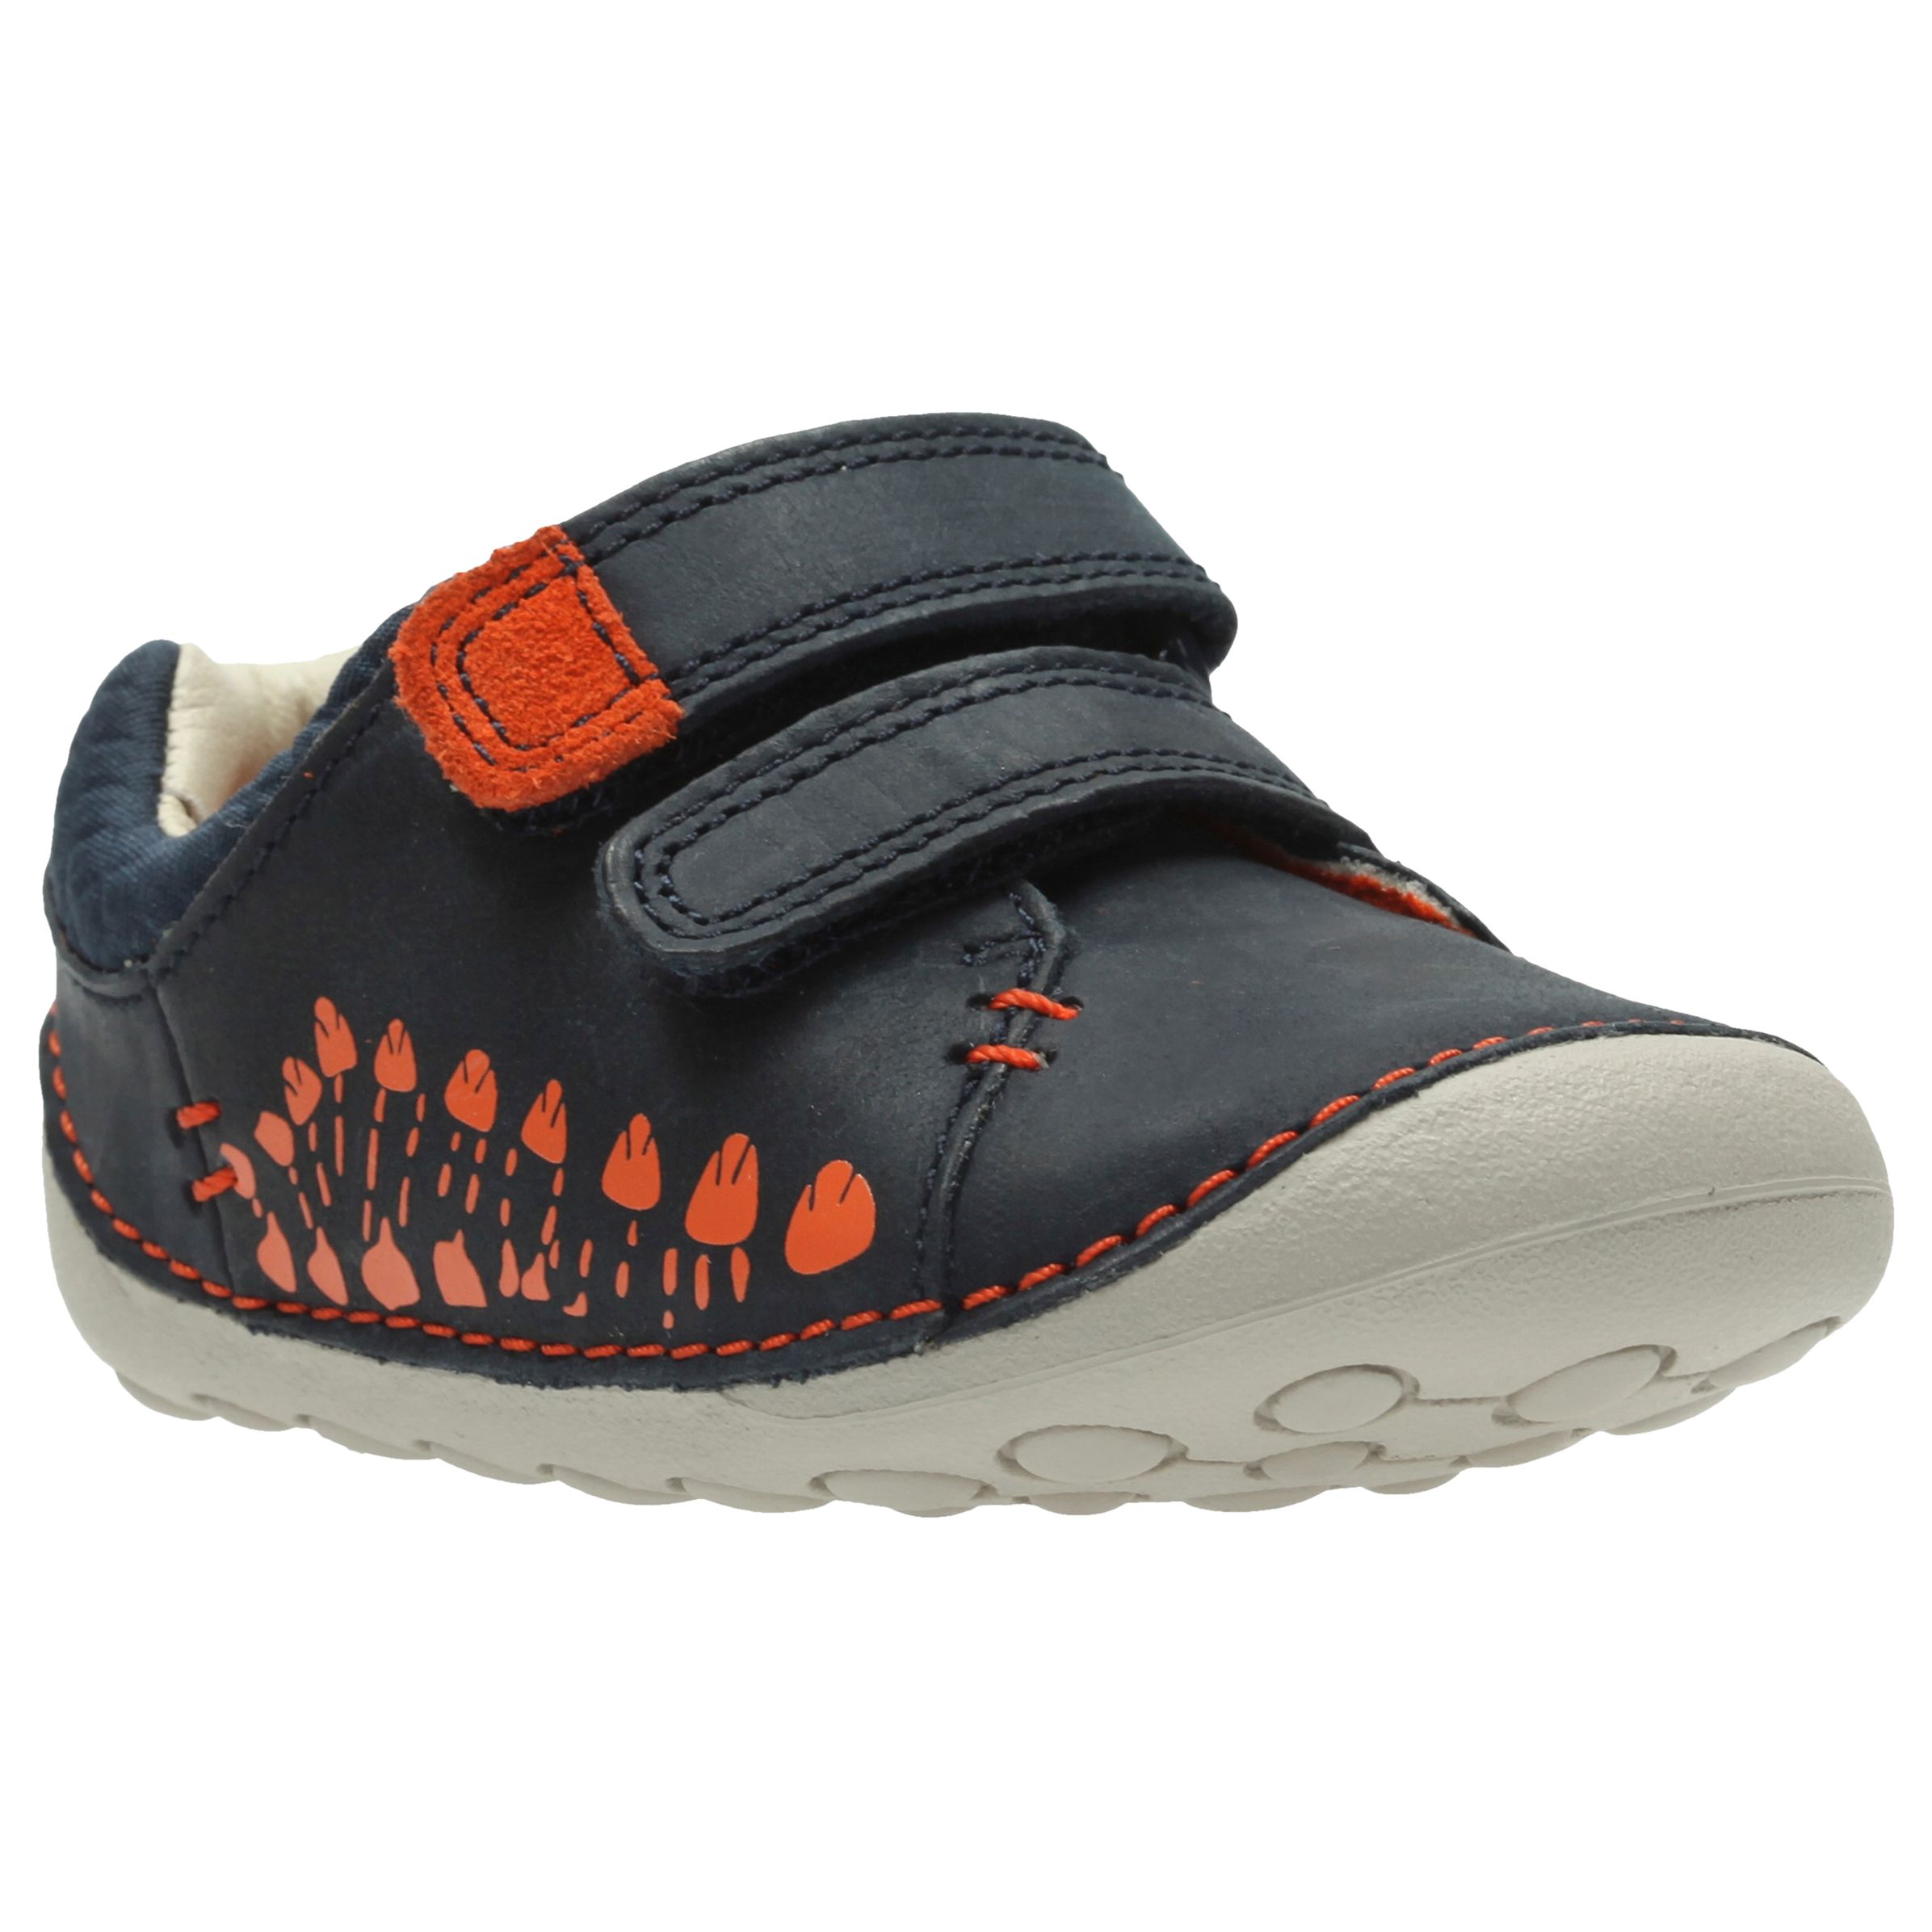 clarks baby first walkers